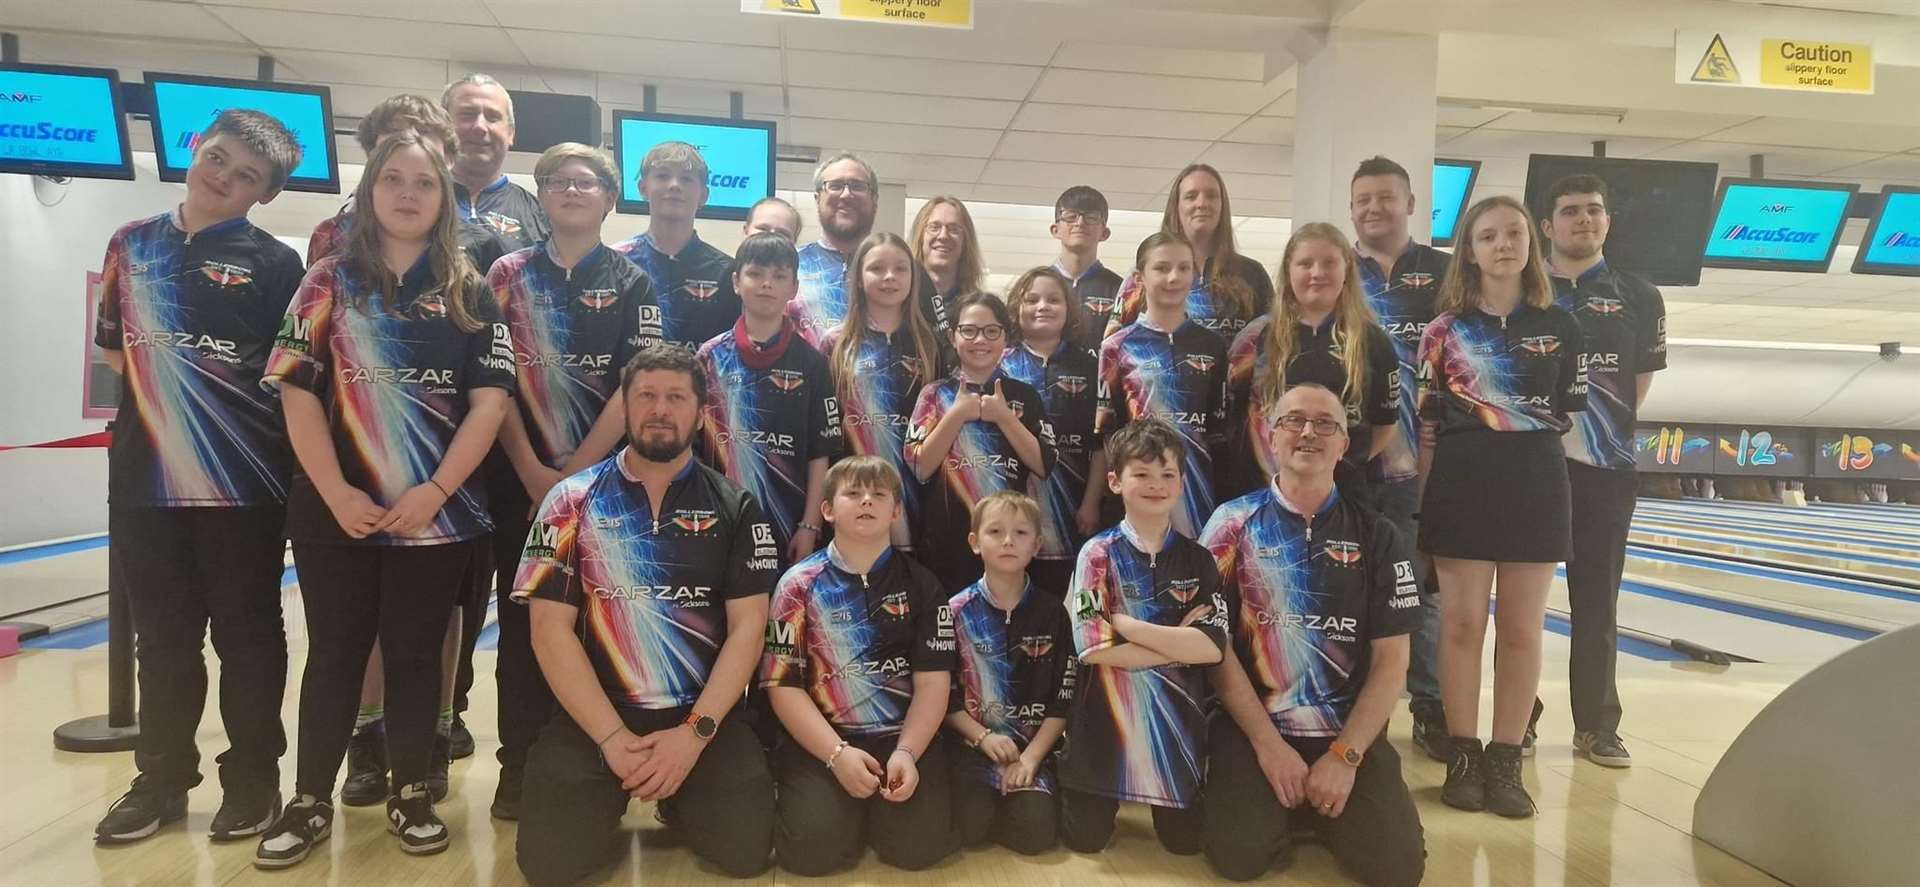 All of the Inverness competitors from the Rollerbowl Youth Bowling Club, who took 20 medals at the national event in Ayr.